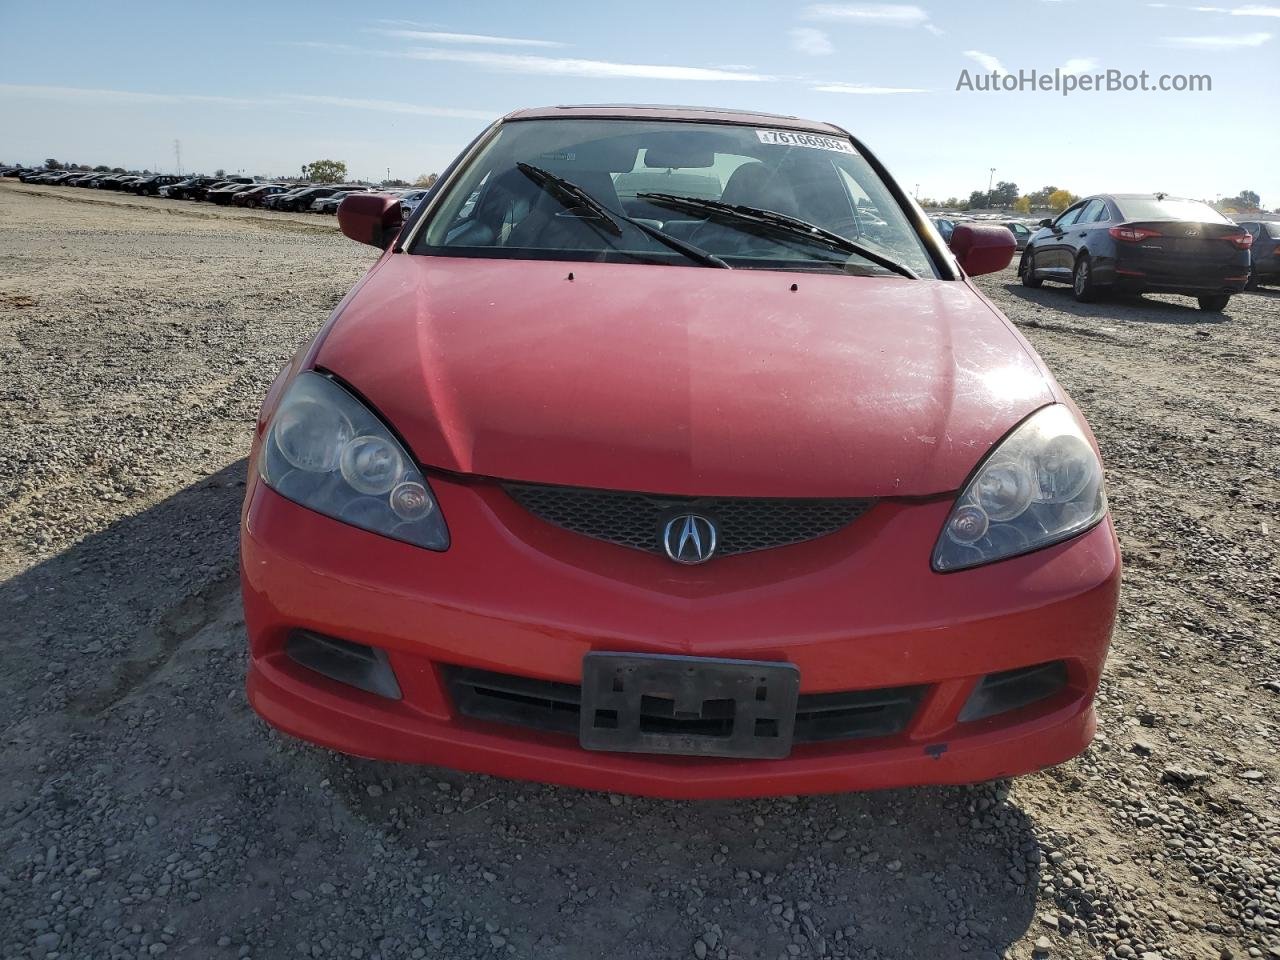 2006 Acura Rsx  Red vin: JH4DC54846S010340